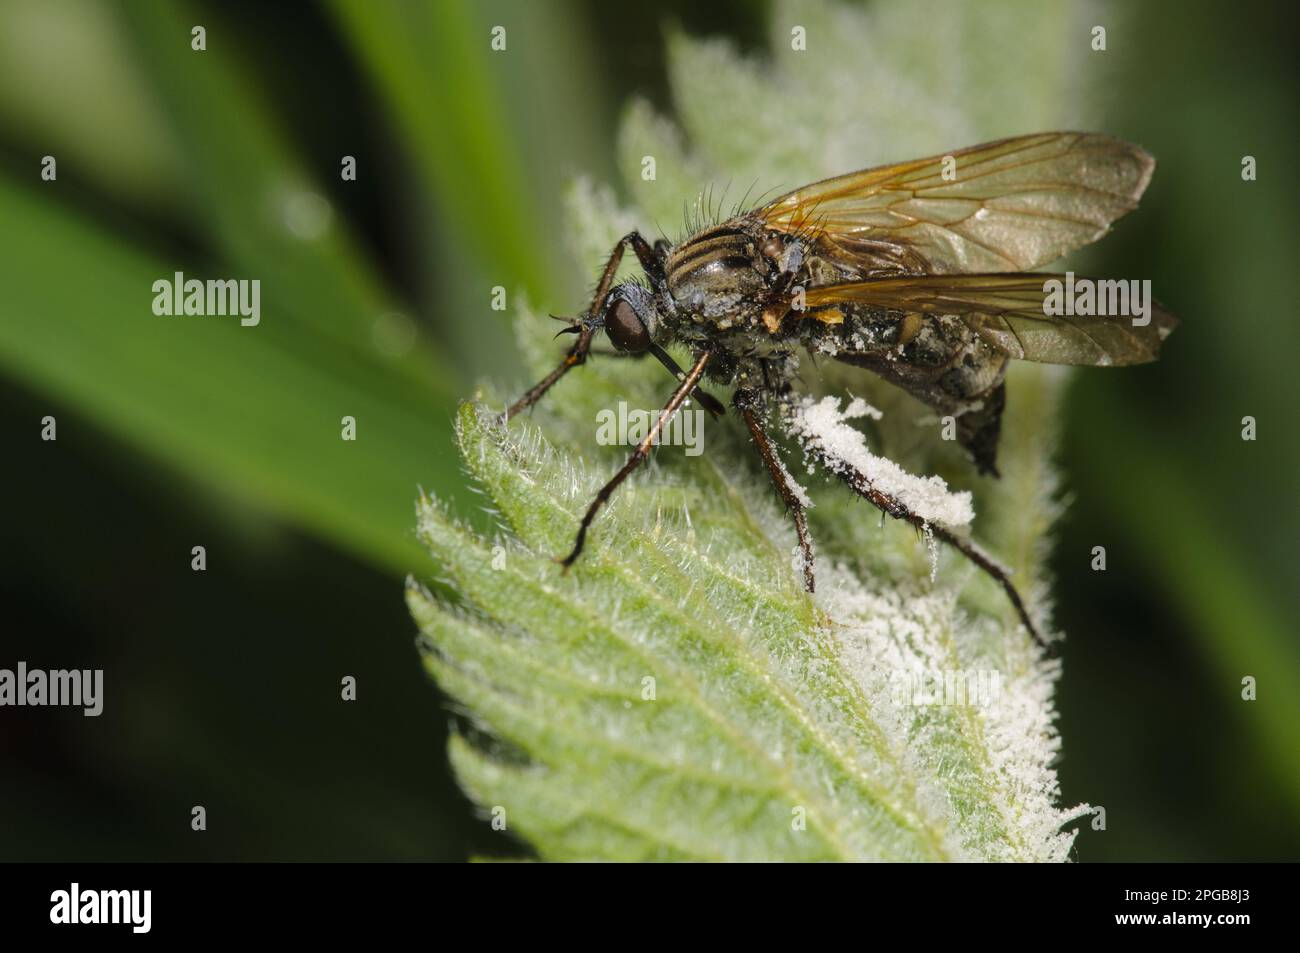 Adult empis tessellatav (Empis tessellata) that has fallen victim to a pathogenic fungus (Entomophthora muscae) that invades the brain and causes it Stock Photo